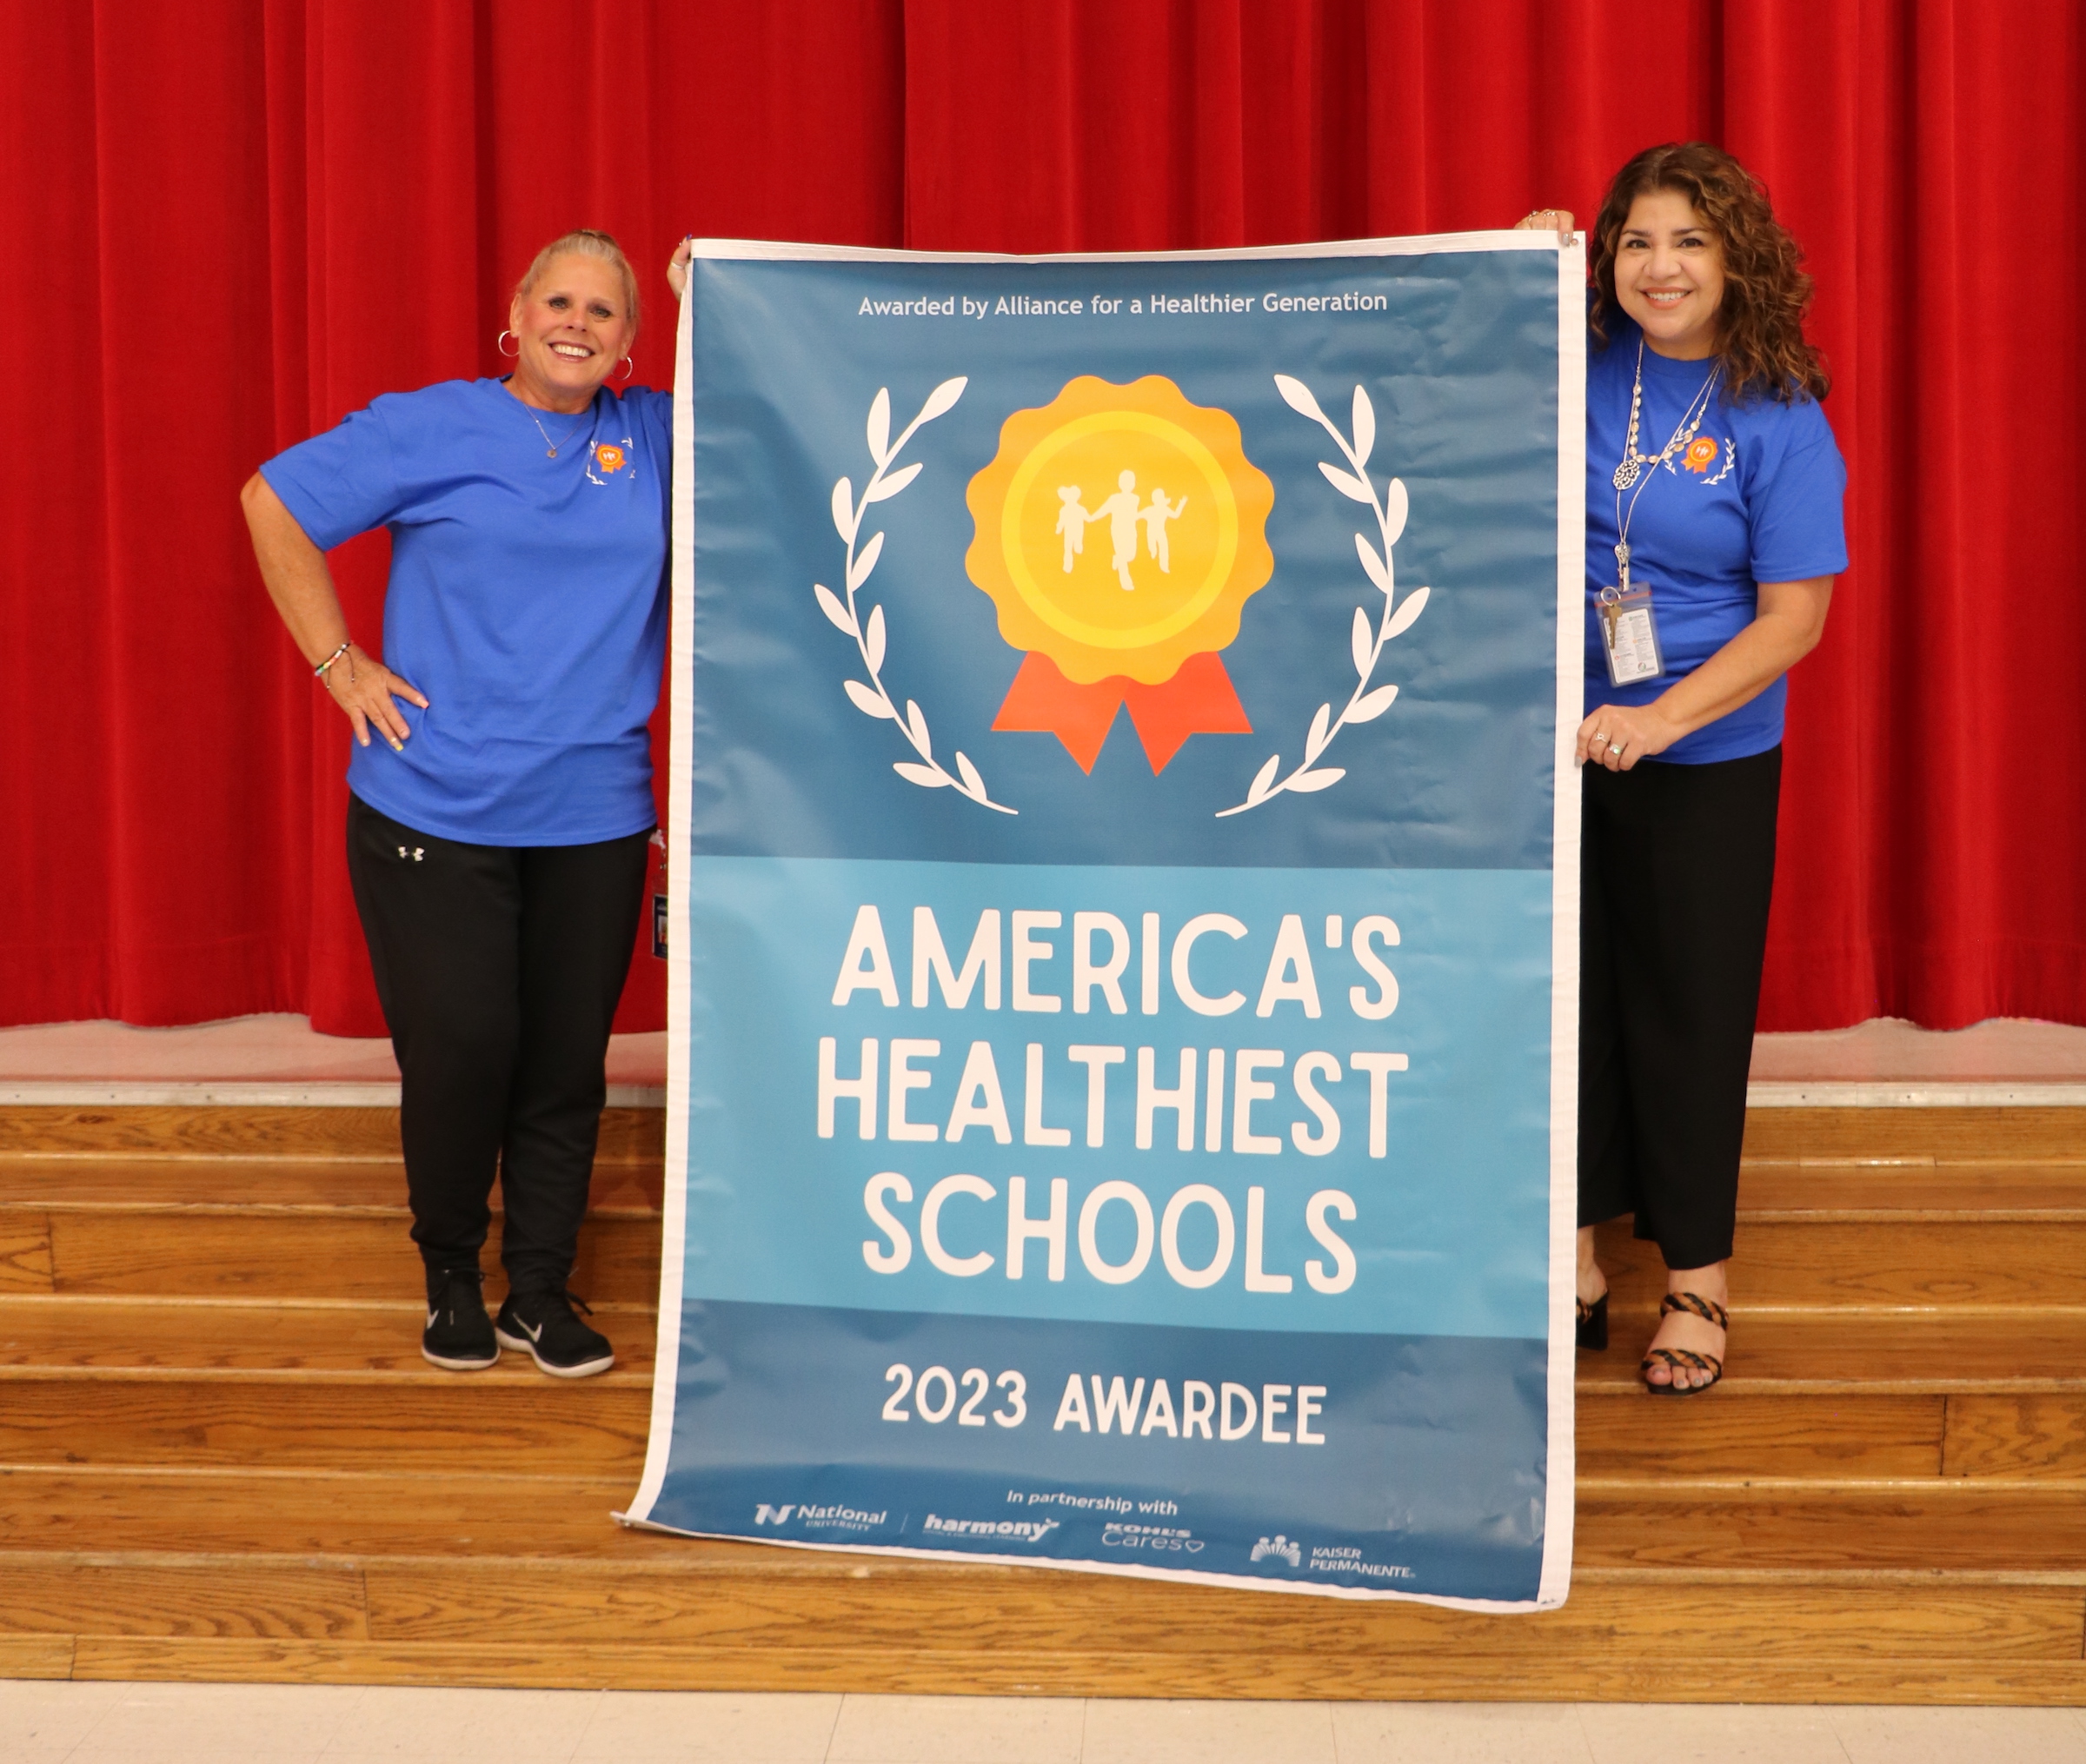 Harlem elementary poses with americas healthiest schools banner